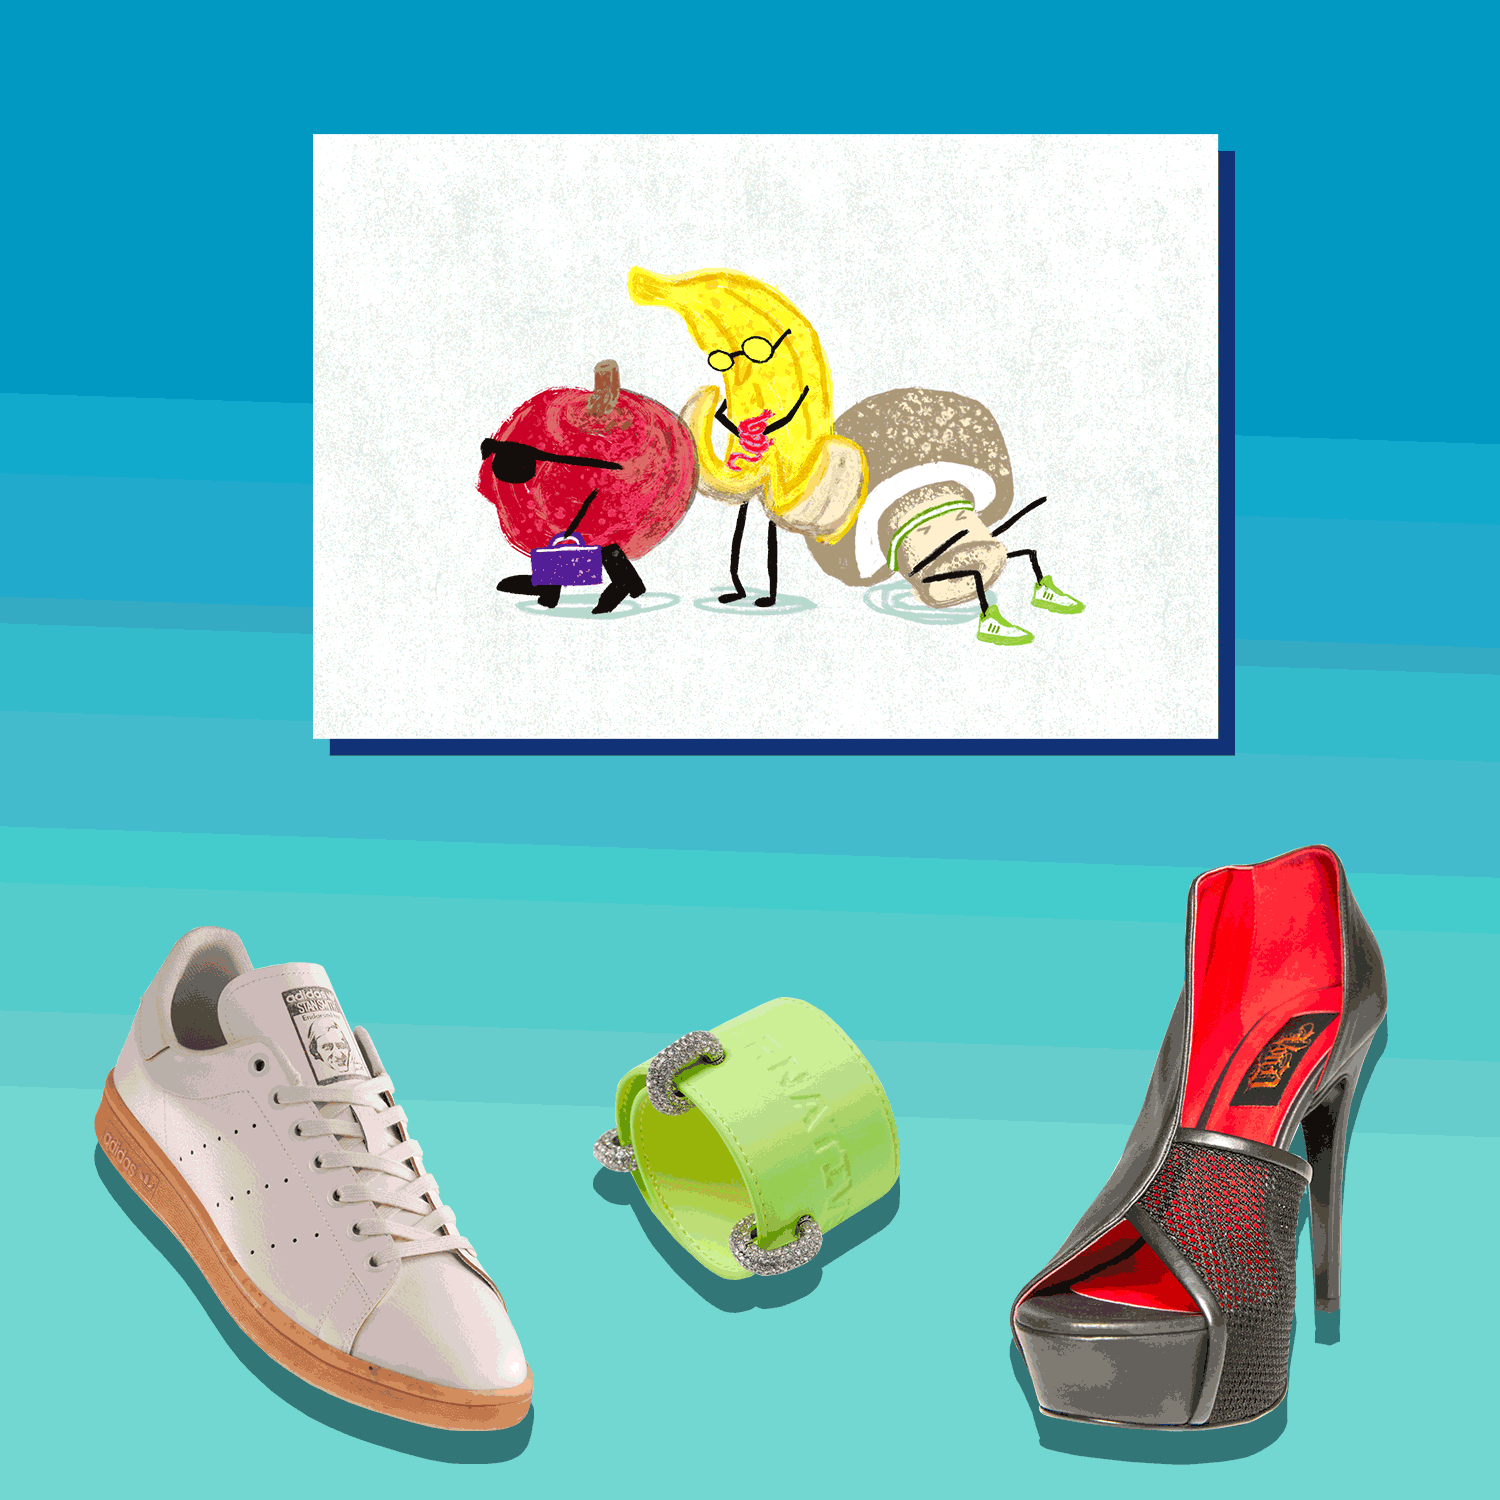 A white sneaker, a lime green arm cuff and a black high heel move back and forth.